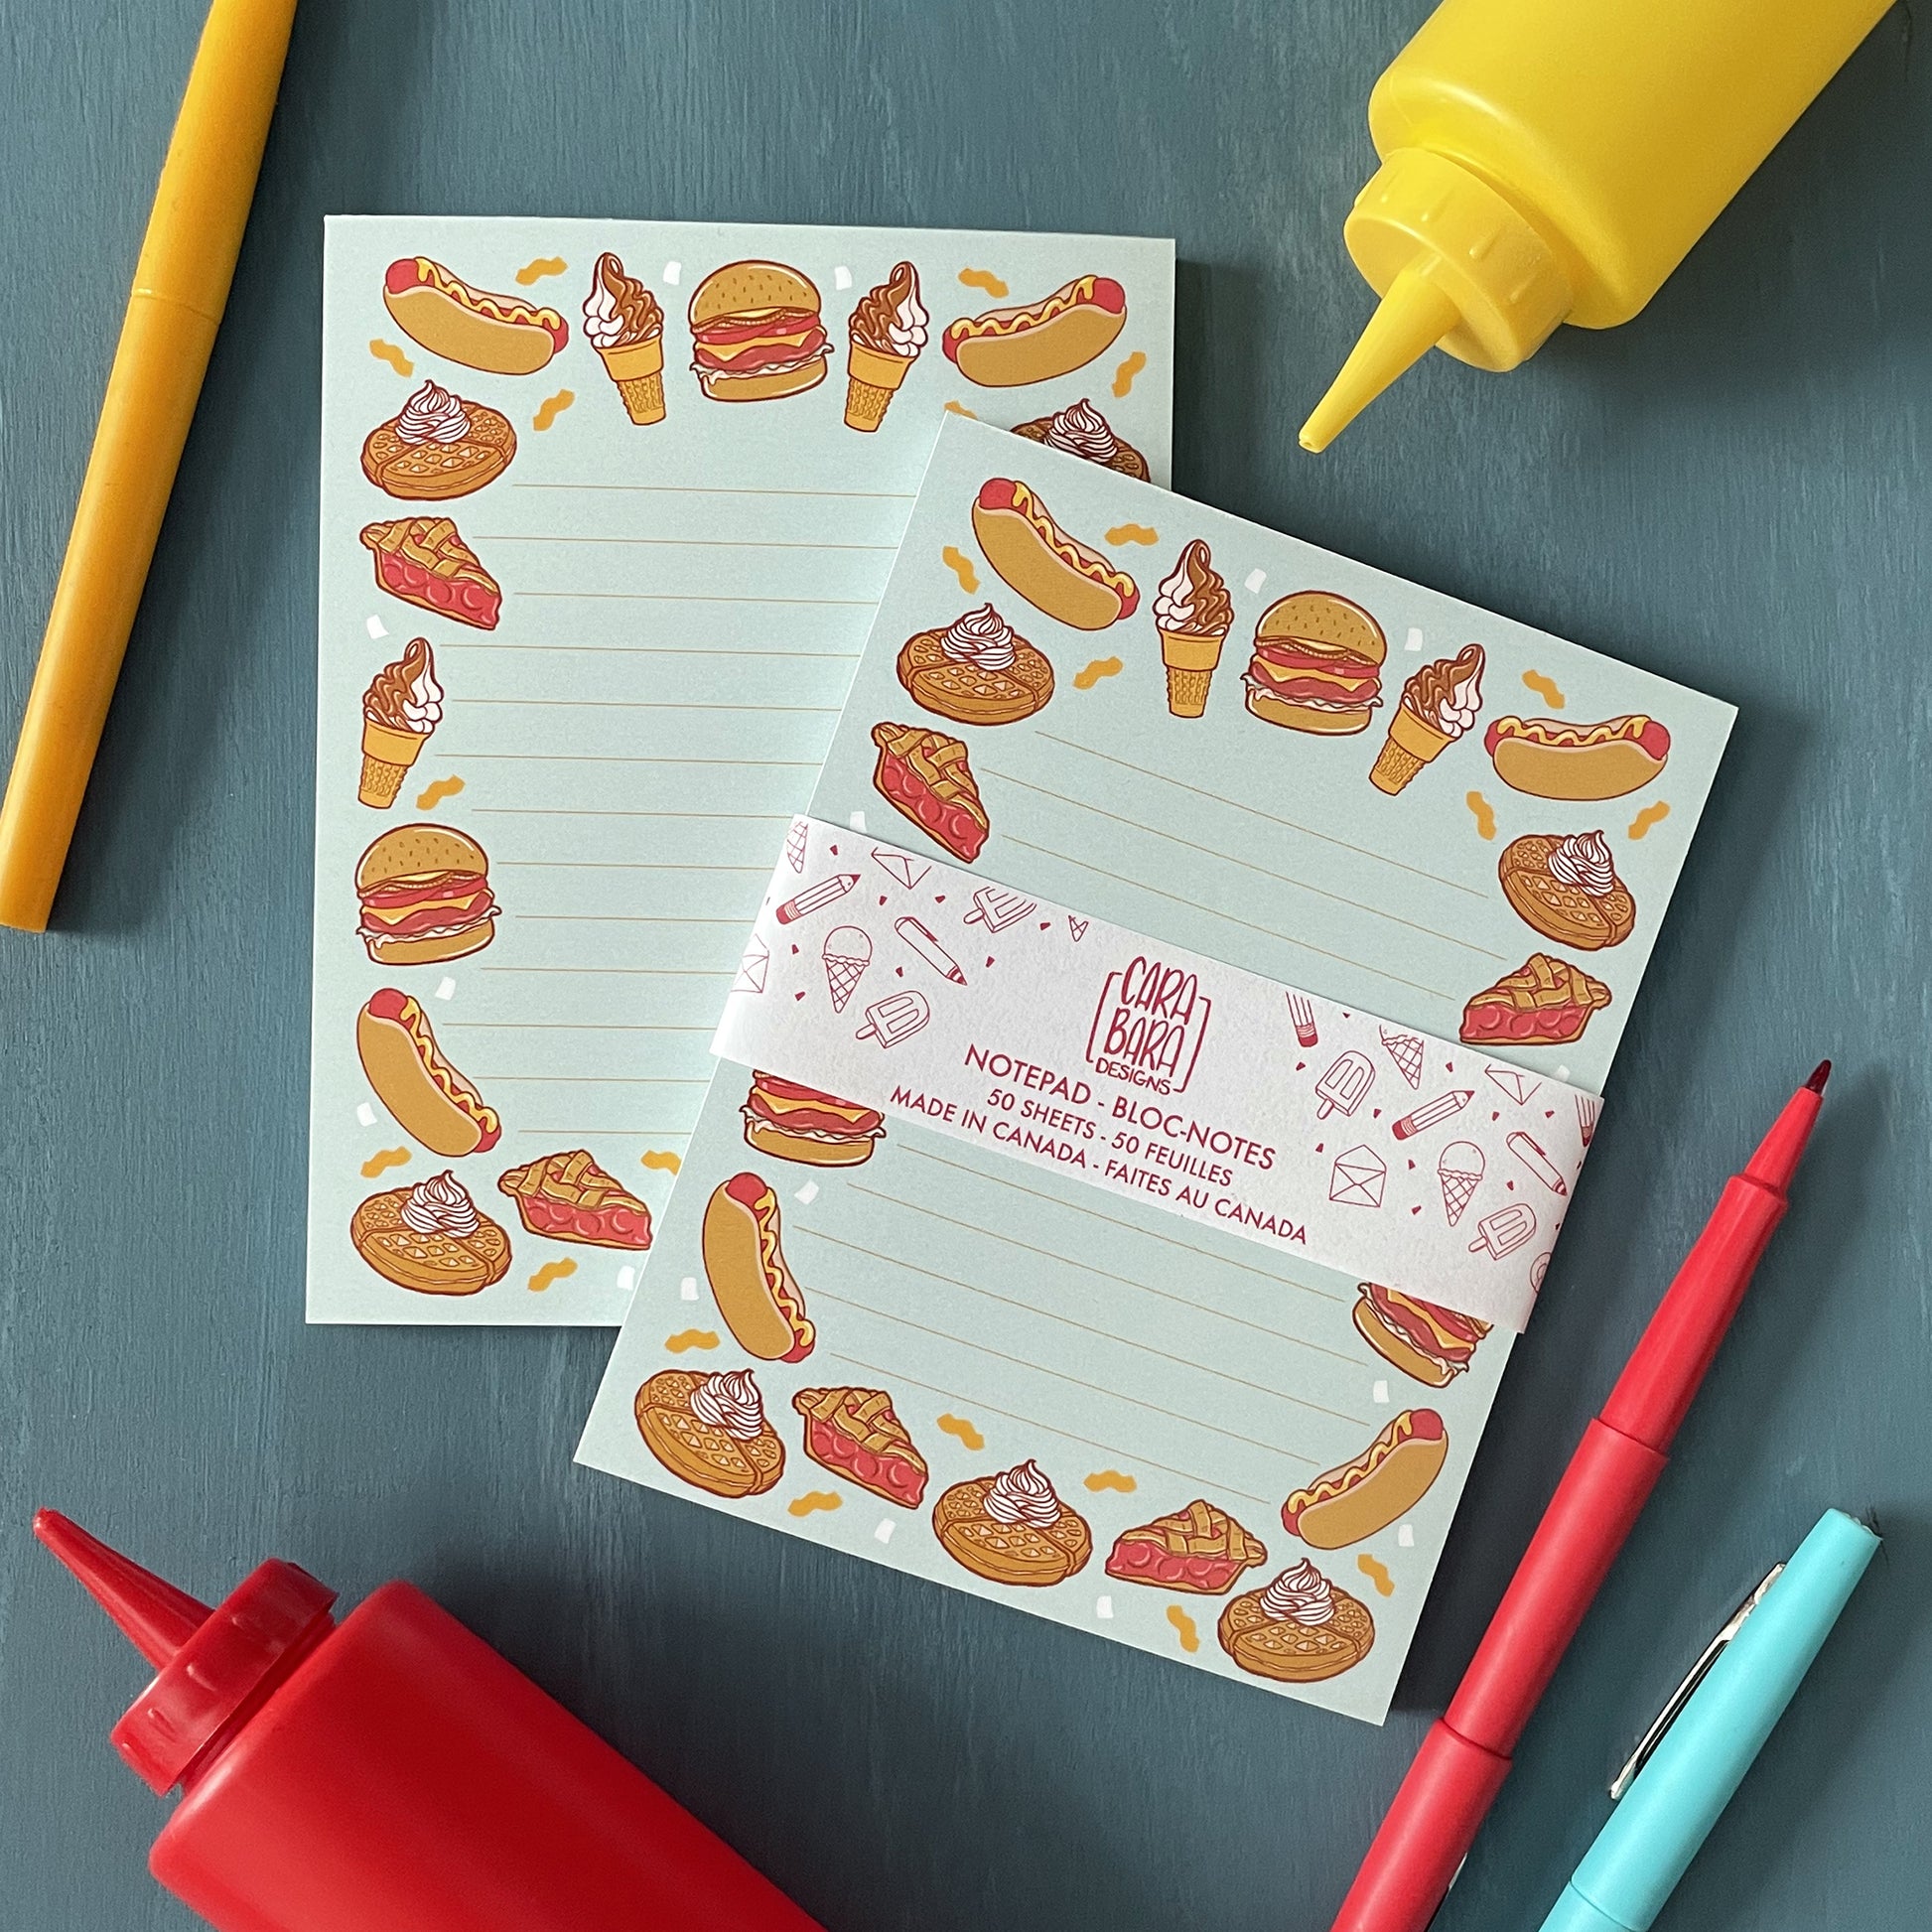 A pair of blue lined notepads feature illustrations of burgers, hot dogs, ice cream, waffles, and pie. The 50-page notepad is on a blue surface with ketchup and mustard squeeze bottles and red, yellow and blue pens. The front notepad is packaged in a belly band with the Carabara Designs logo, indicating the notepad is 50 pages and made in Canada.